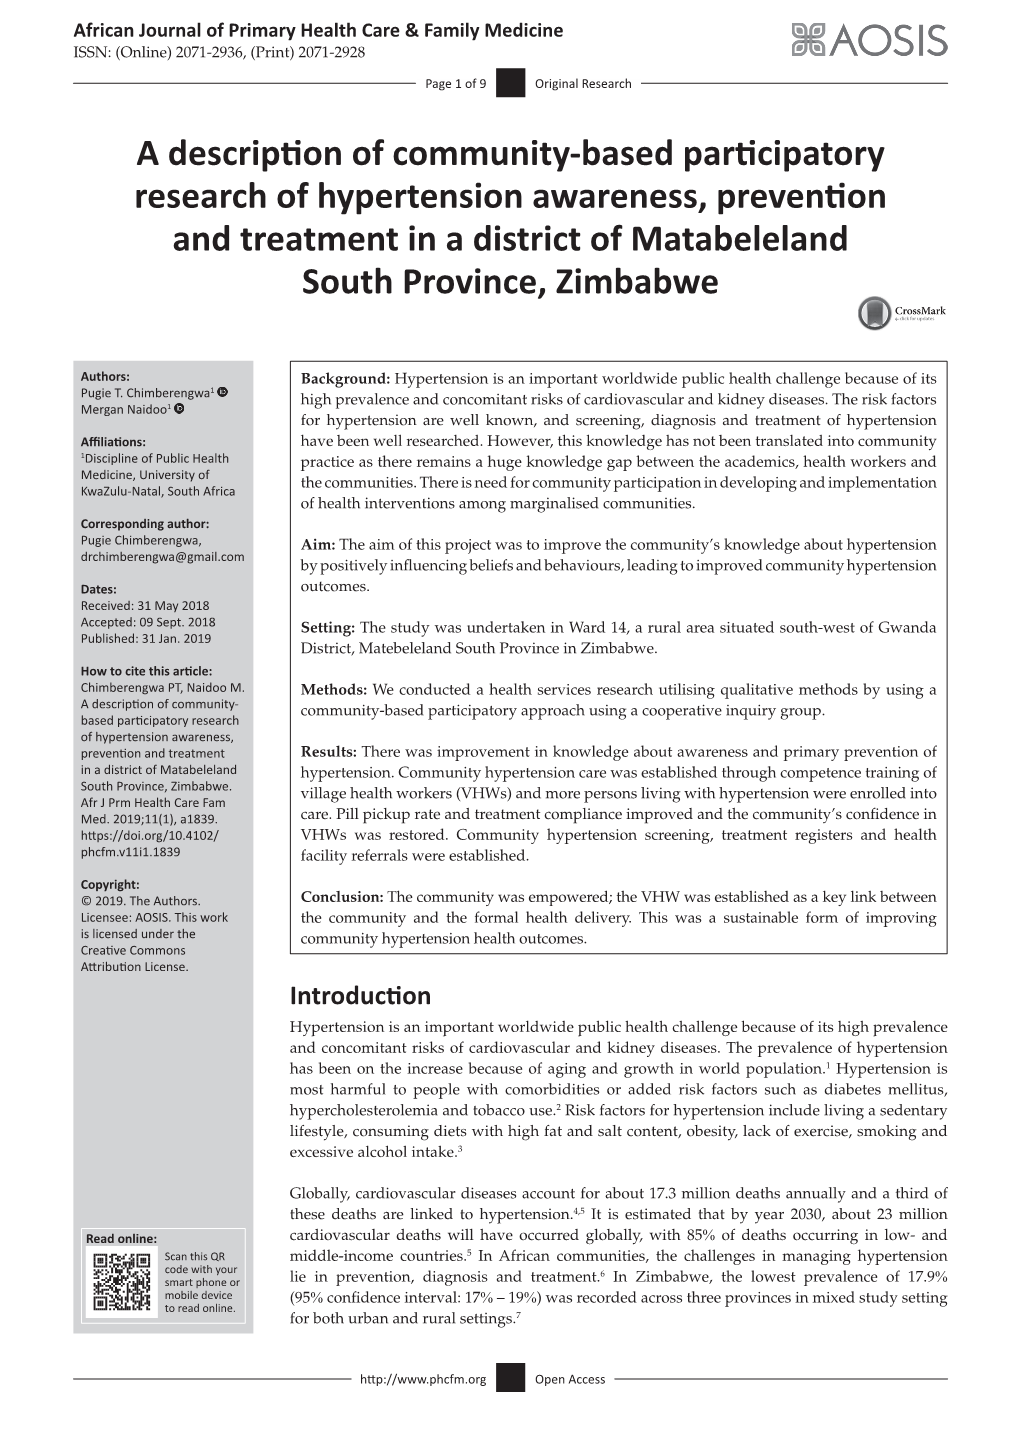 A Description of Community-Based Participatory Research of Hypertension Awareness, Prevention and Treatment in a District of Matabeleland South Province, Zimbabwe